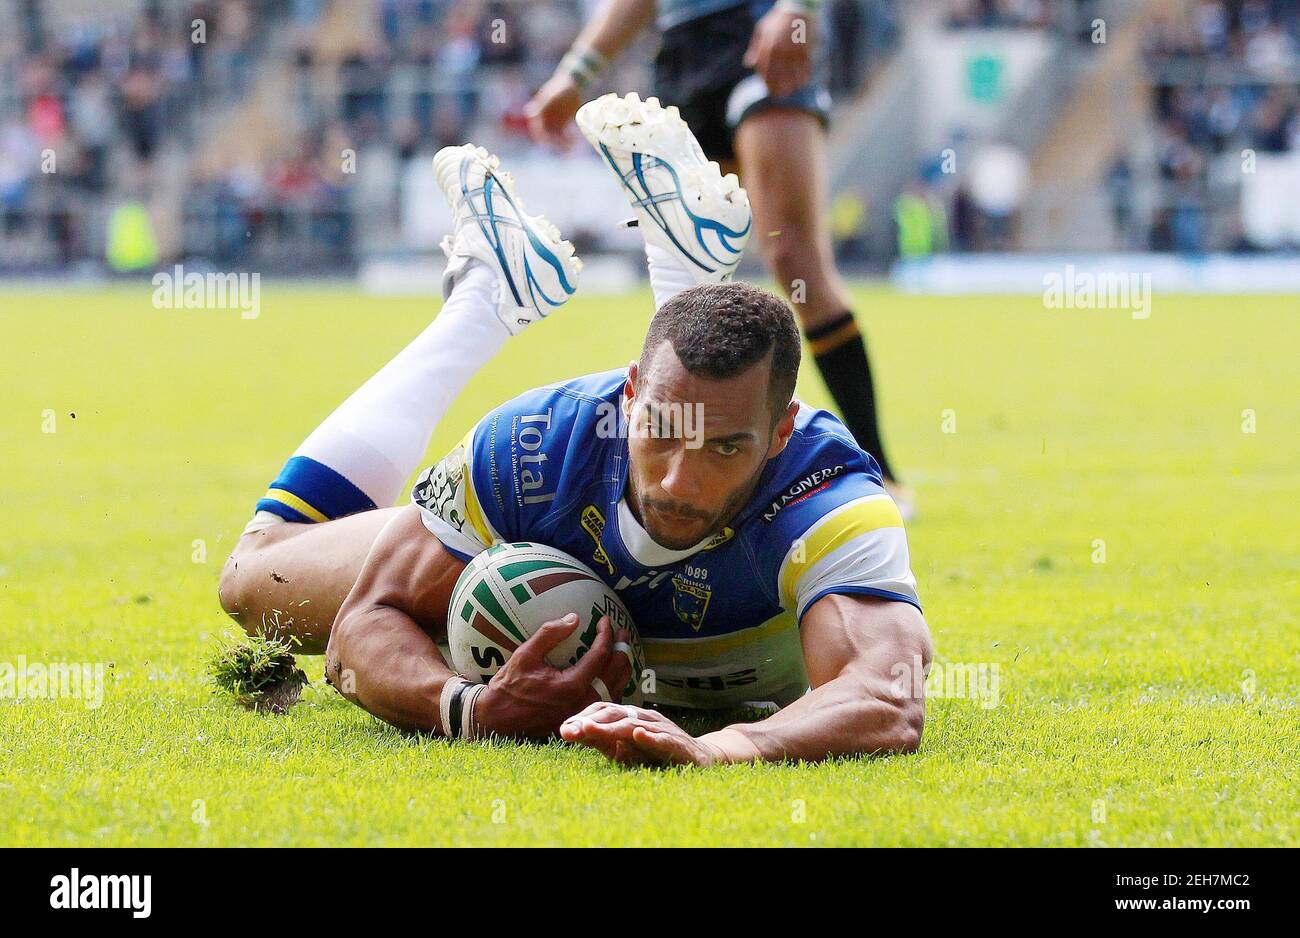 Rugby League - Warrington Wolves v Hull FC Stobart Super League - The Halliwell Jones Stadium  - 24/6/12  Ryan Atkins scores a try for Warrington  Mandatory Credit: Action Images / Peter Cziborra  Livepic Stock Photo